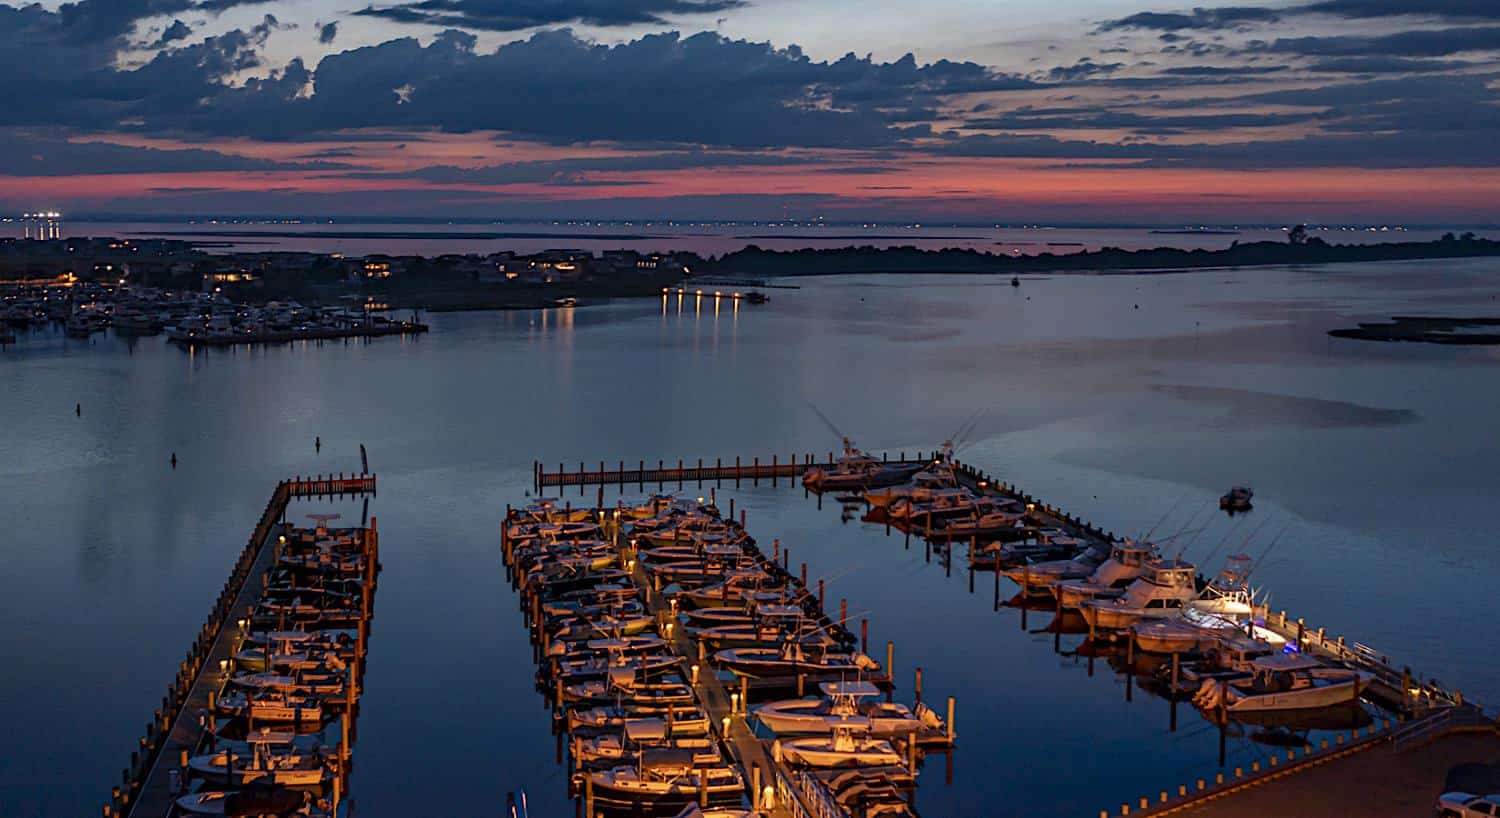 Aerial view of harbor full of boats in a coastal town at dusk